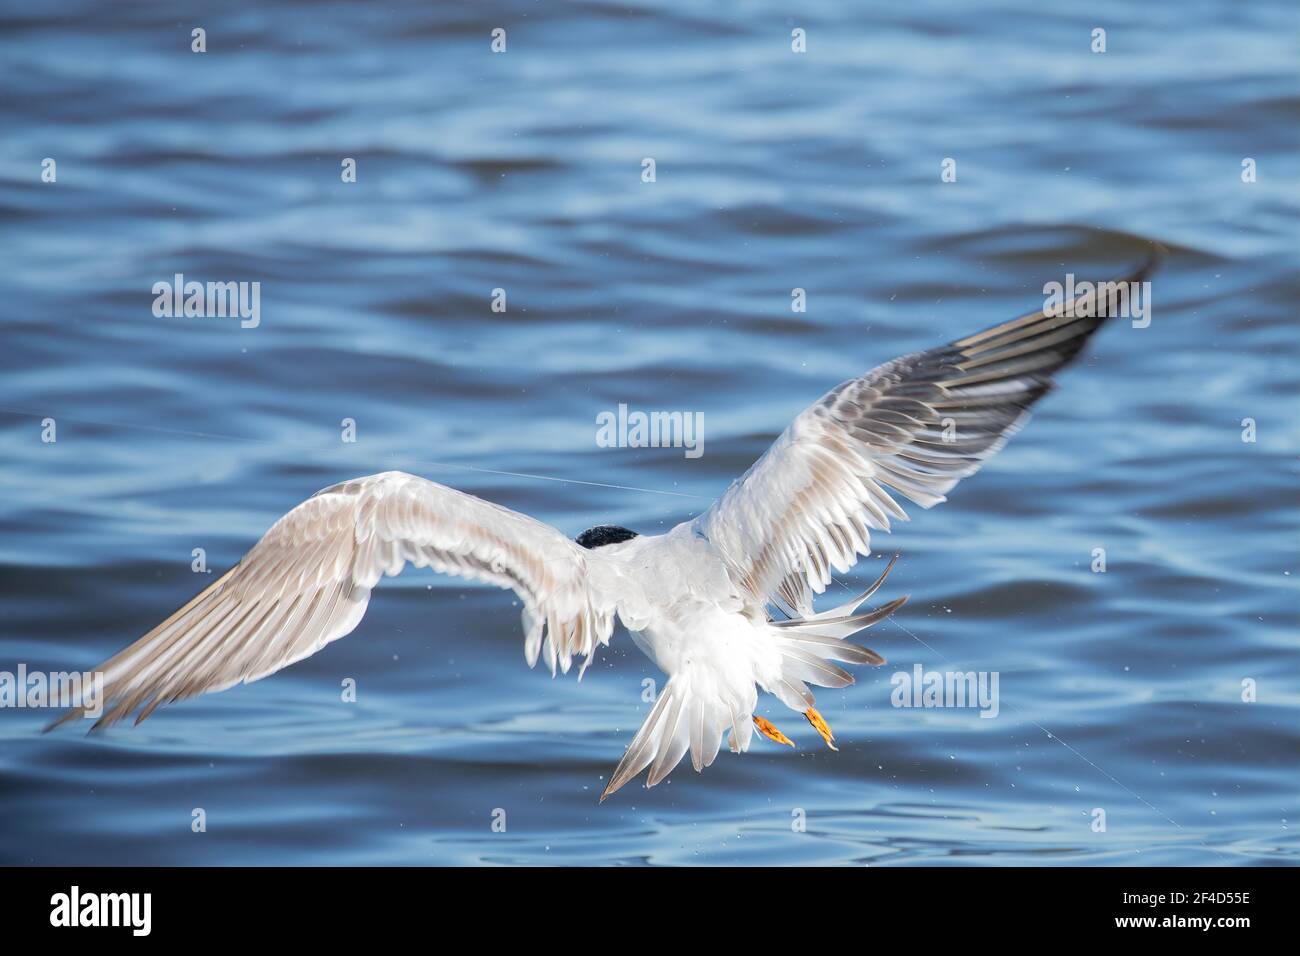 This royal ternl is in danger of getting entangled in fishing line at the Guana dam.  The wing is touching the line in a near miss. Stock Photo